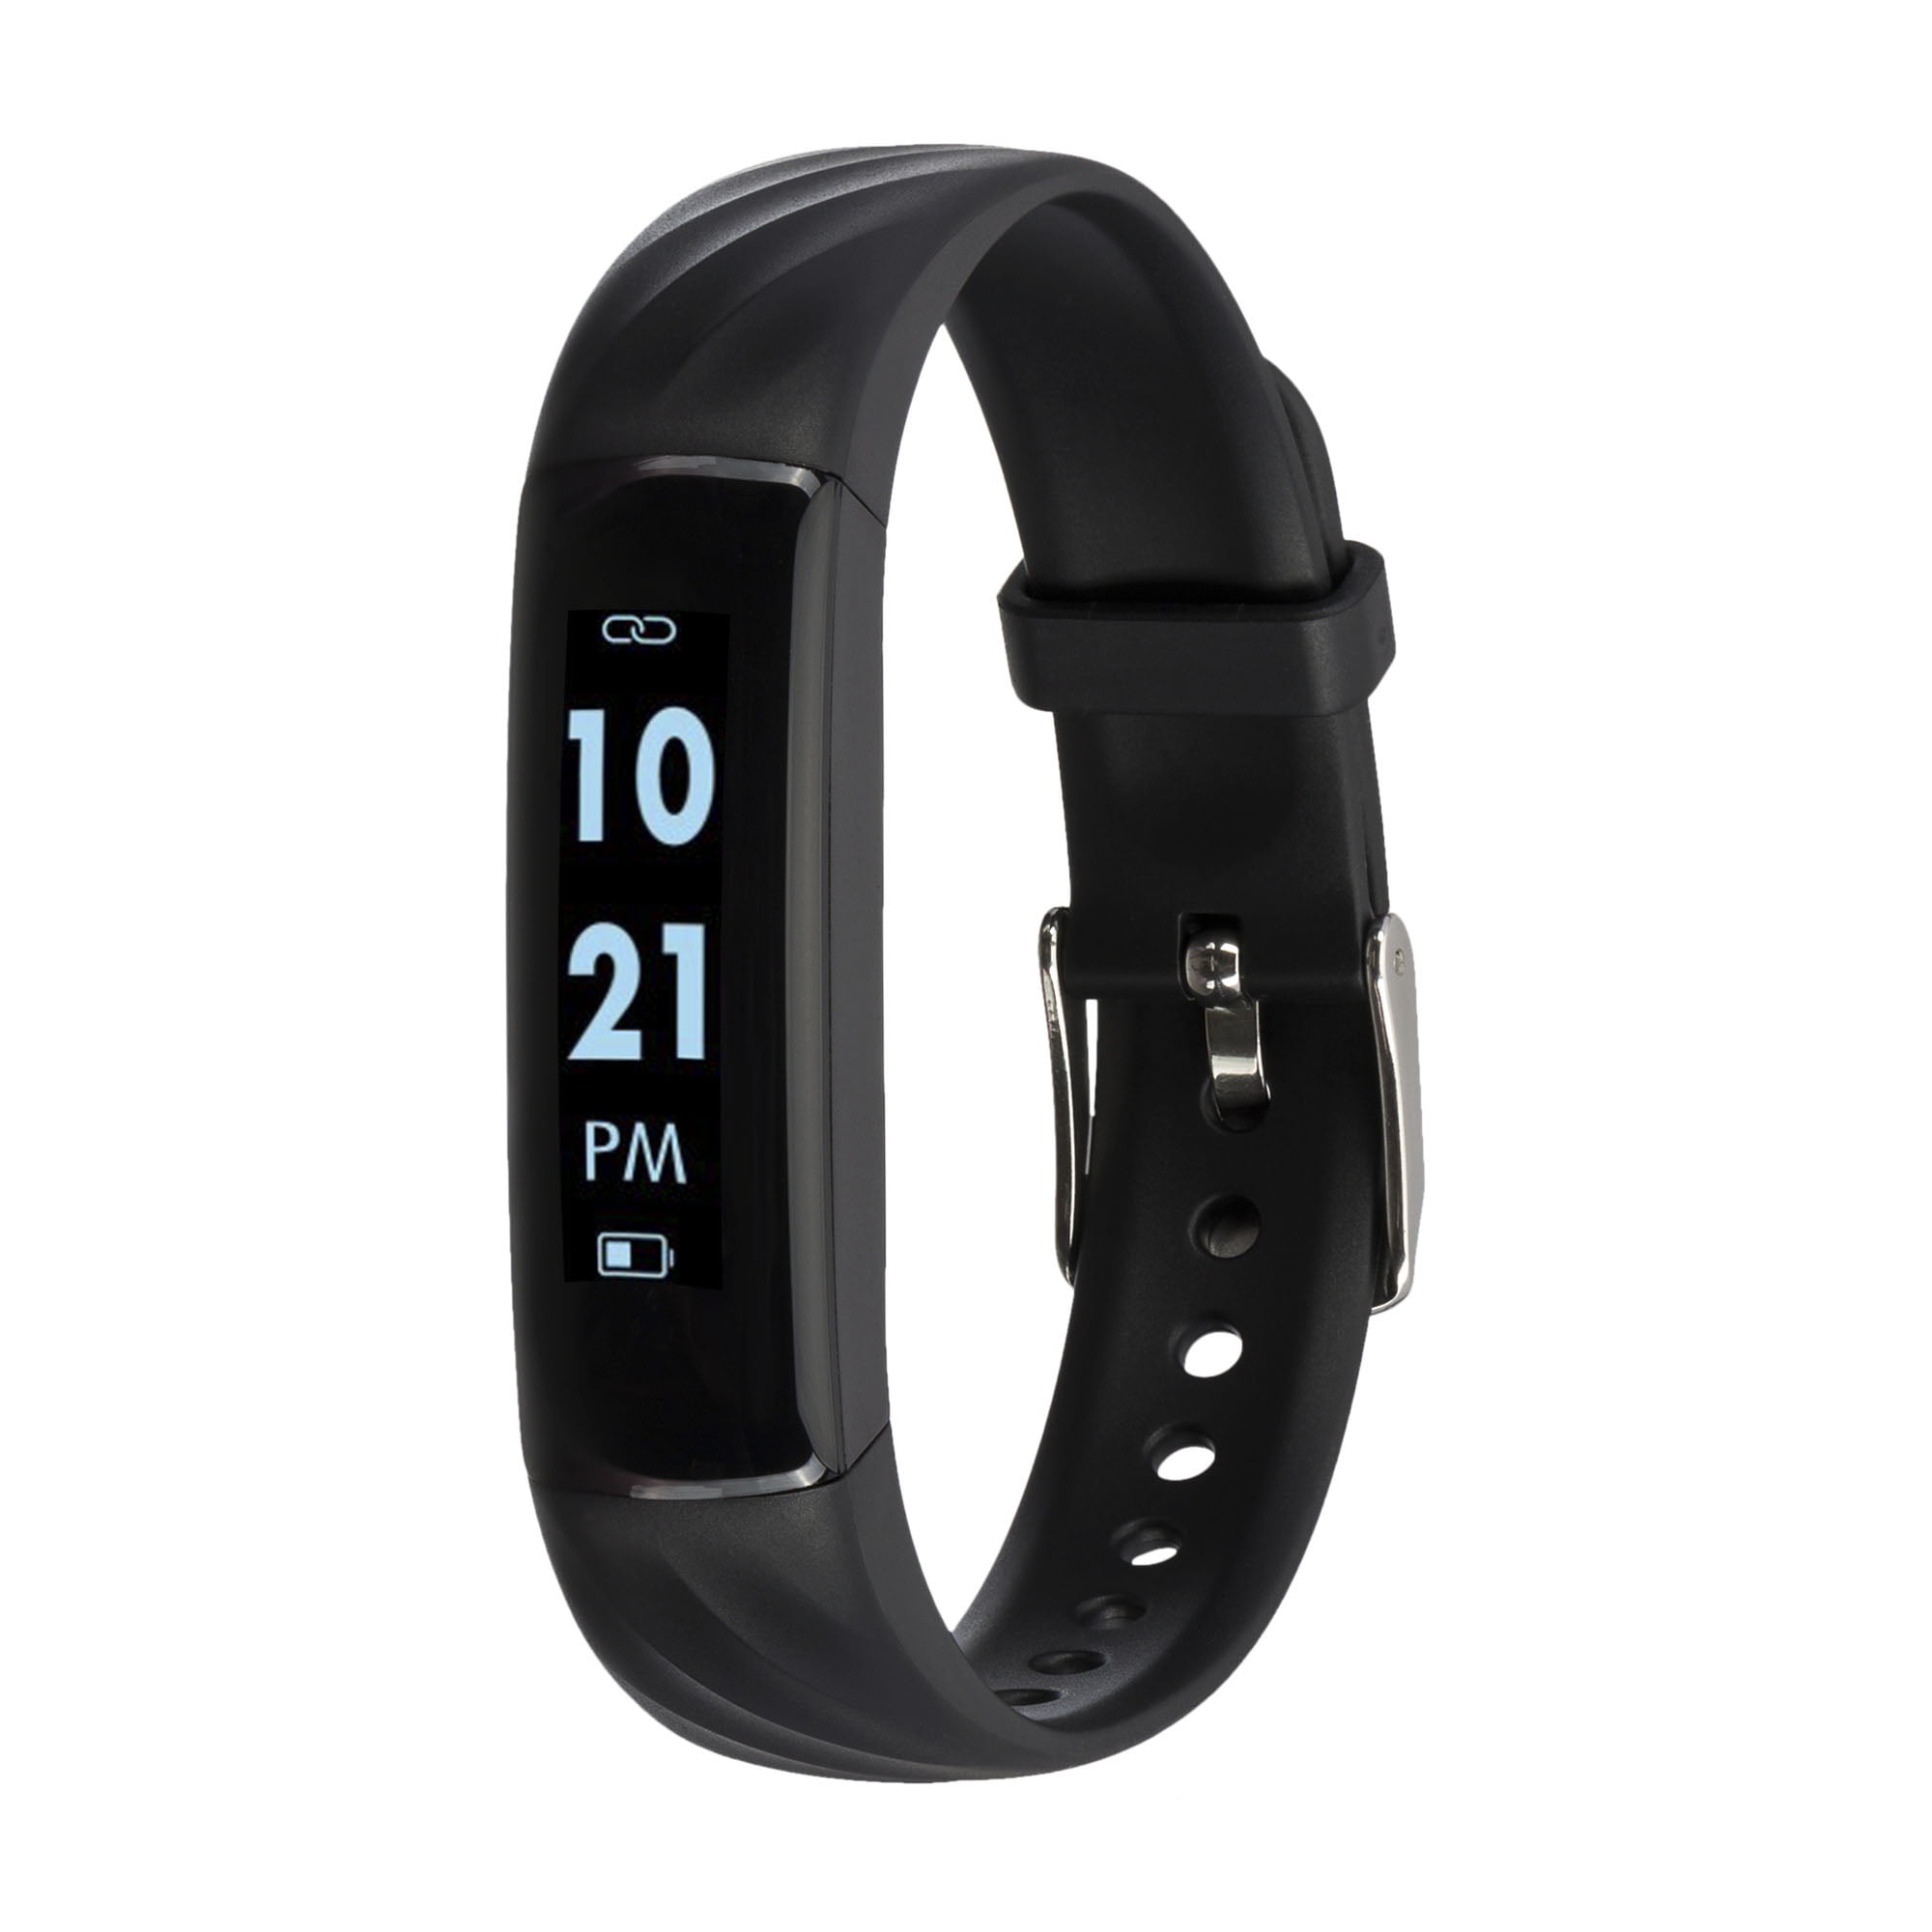 iTouch - iTouch Slim Fitness Tracker with Interchangeable Strap - Black/White - Walmart.com - Walmart.com